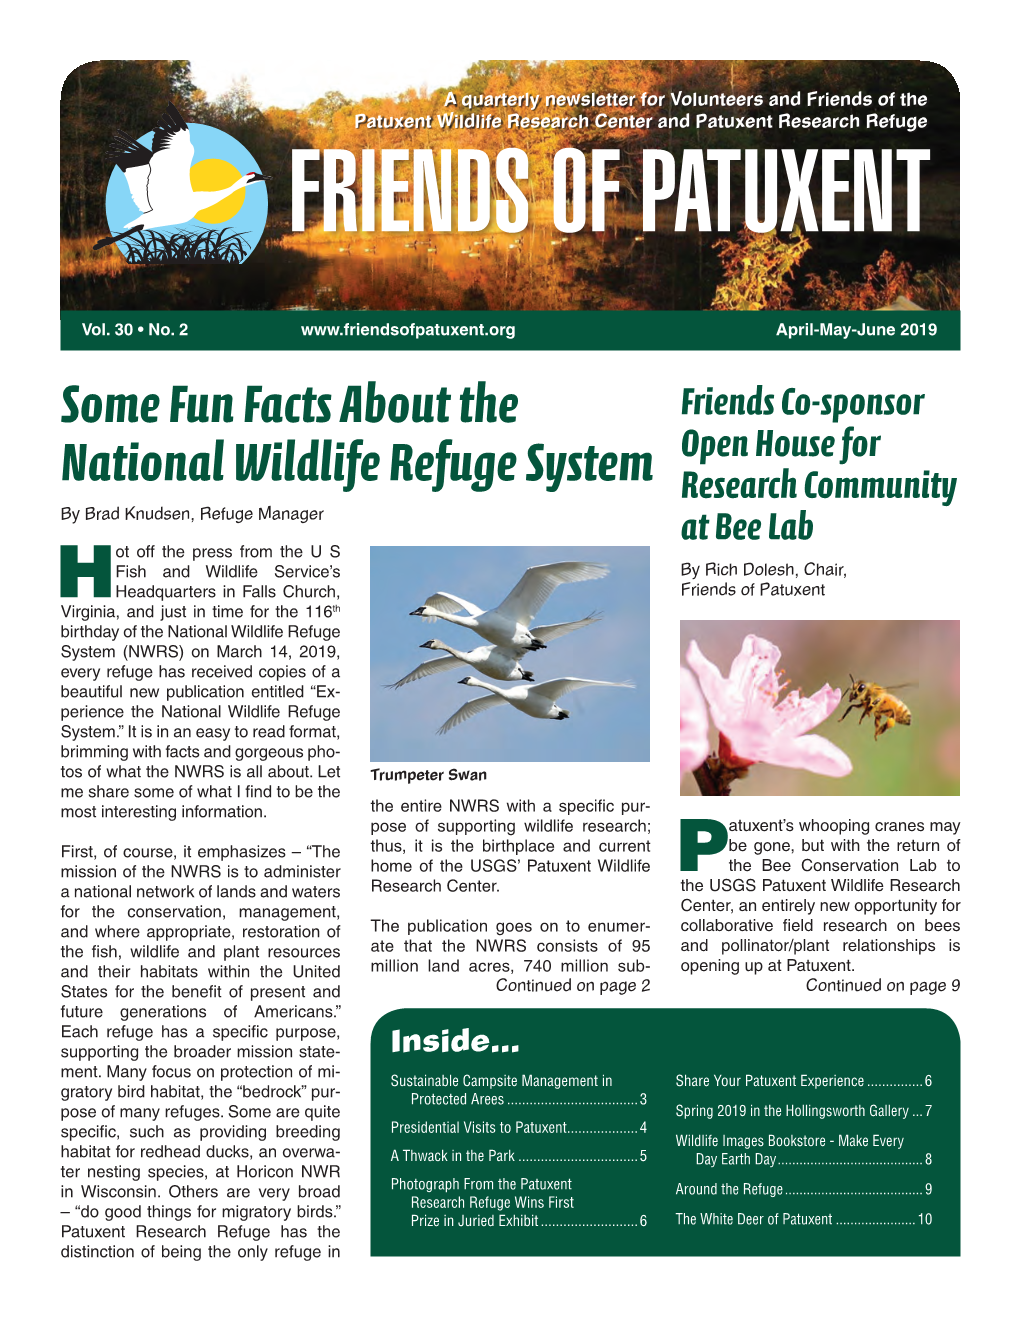 Some Fun Facts About the National Wildlife Refuge System